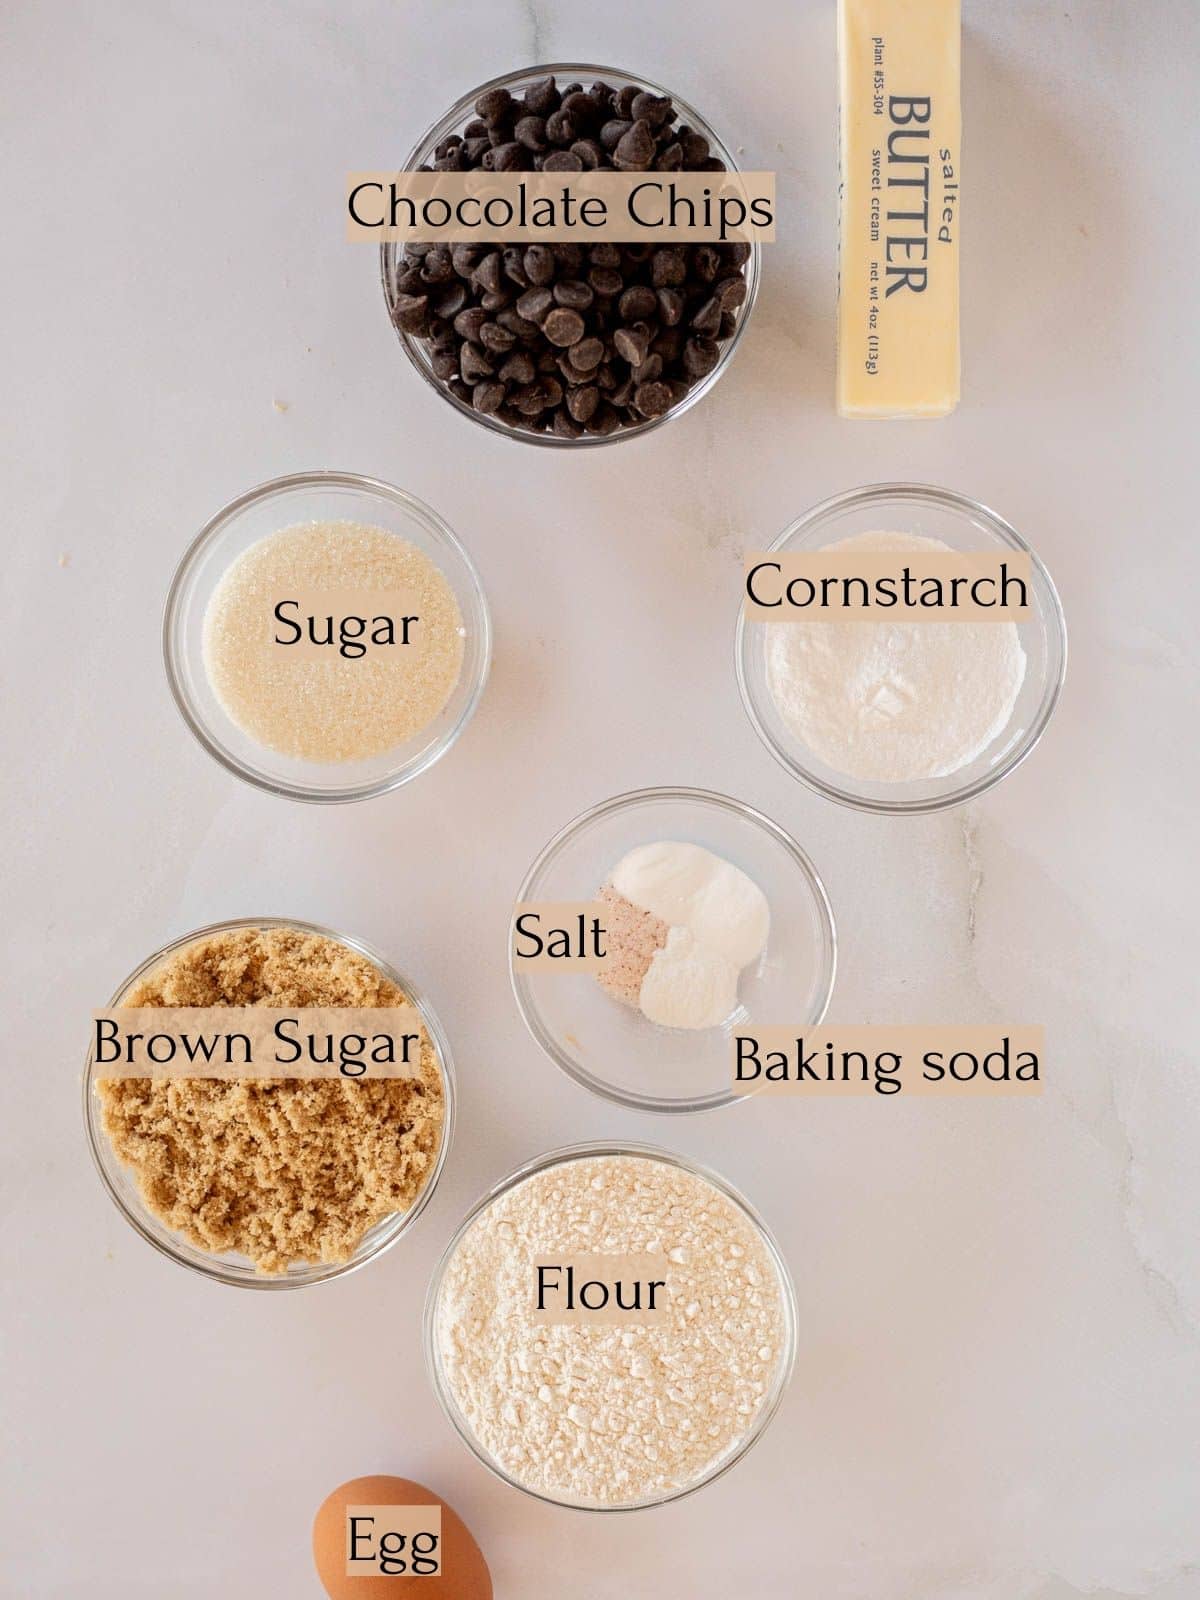 ingredients to make chocolate chip cookies in 15 minutes.